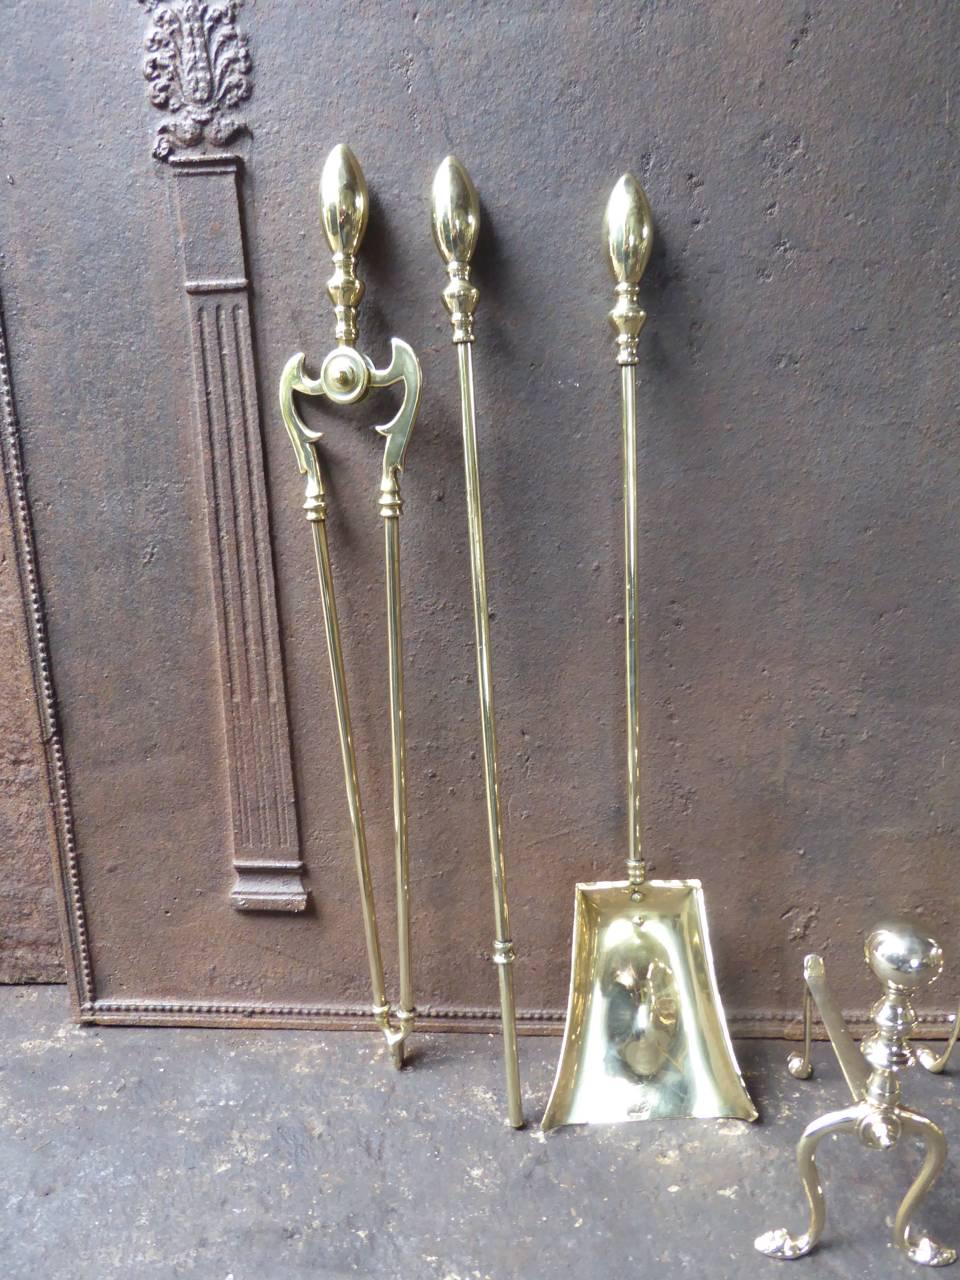 Polished English Fire Tools or Fireplace Tools